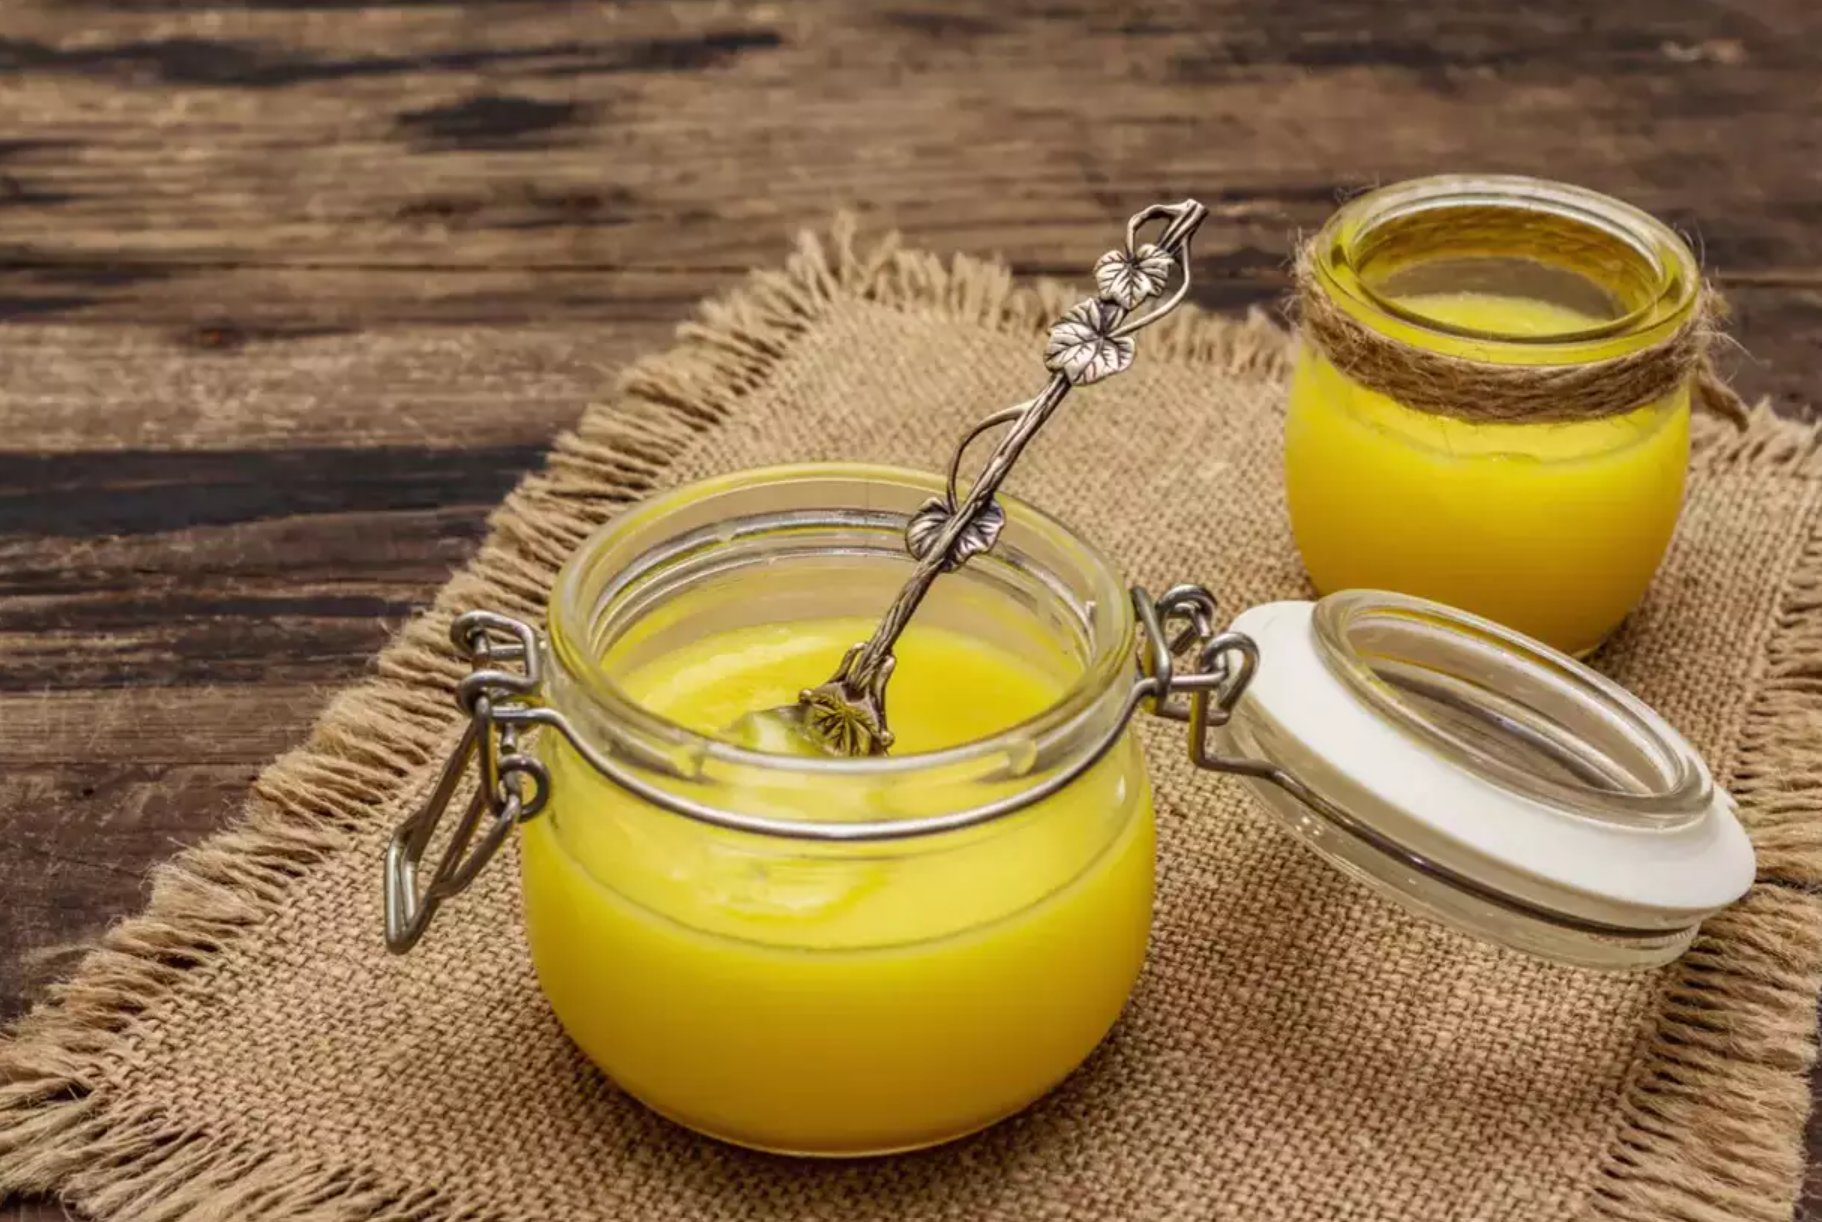 Ghee can be used instead of butter.